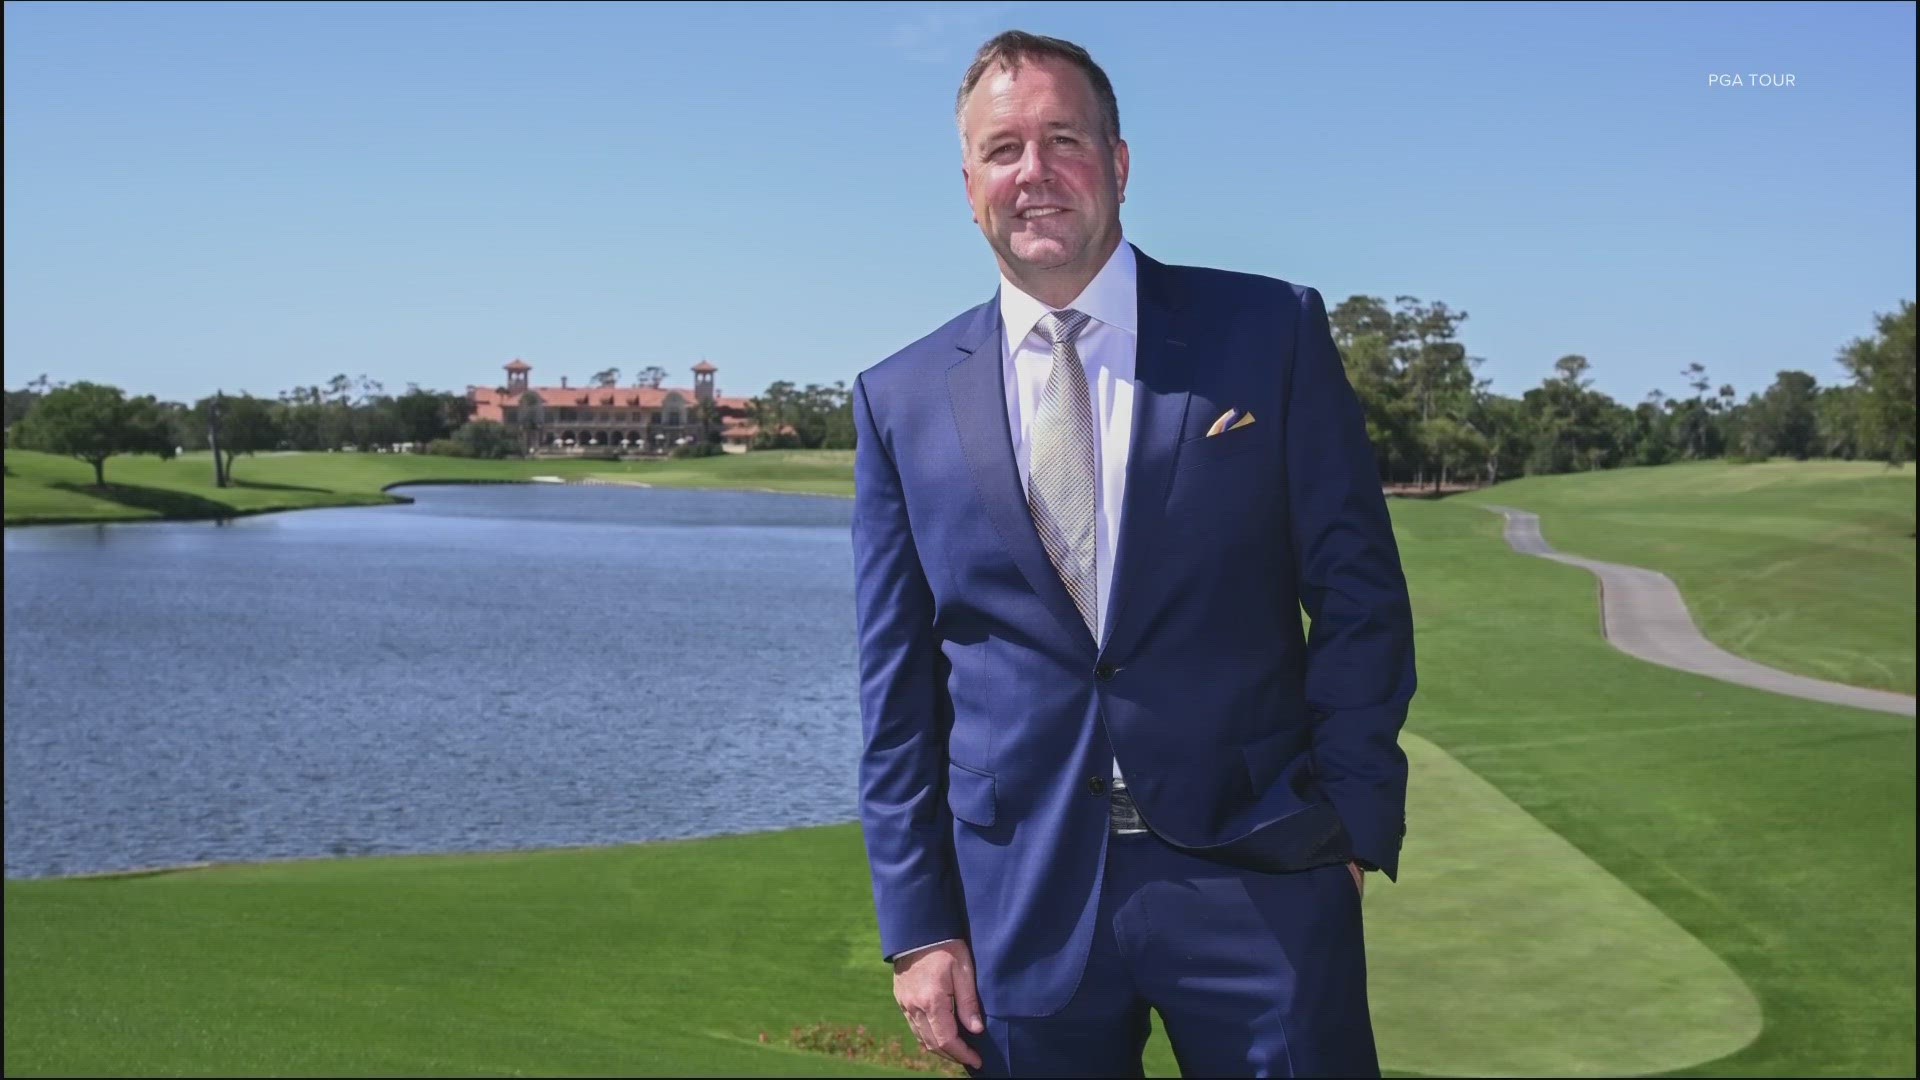 Smith has spent over 20 years with the PGA working in management roles and as a head golf professional. He looks forward to continuing to grow THE PLAYERS.